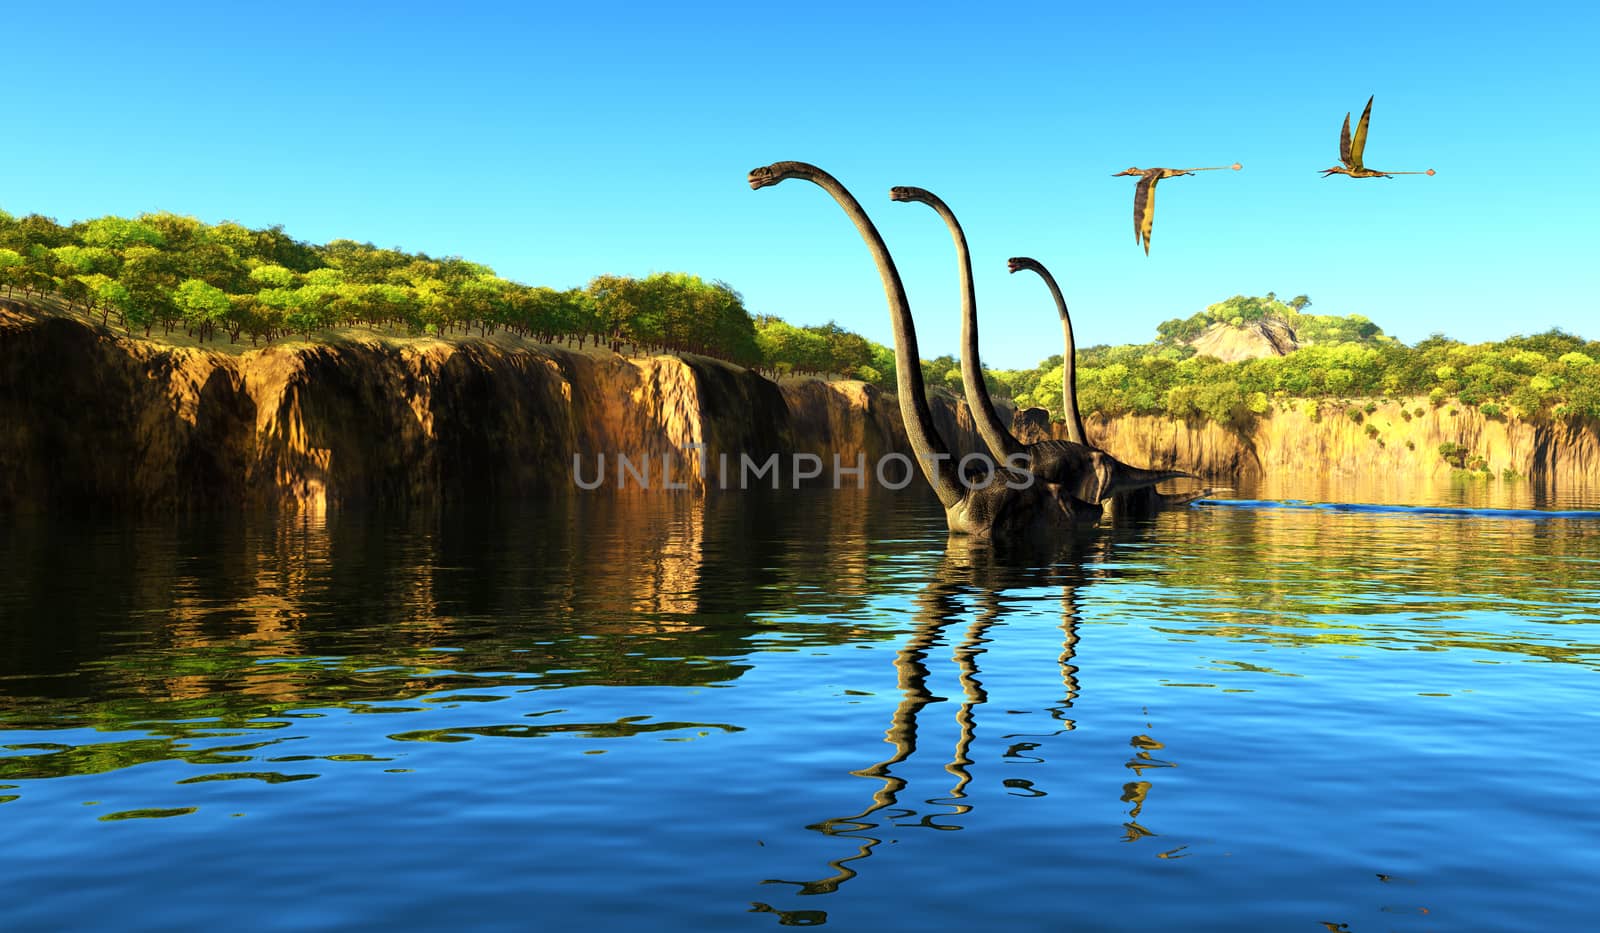 Omeisaurus dinosaurs wade through a river to munch on tree foliage as Rhamphorhynchus reptiles fly nearby.